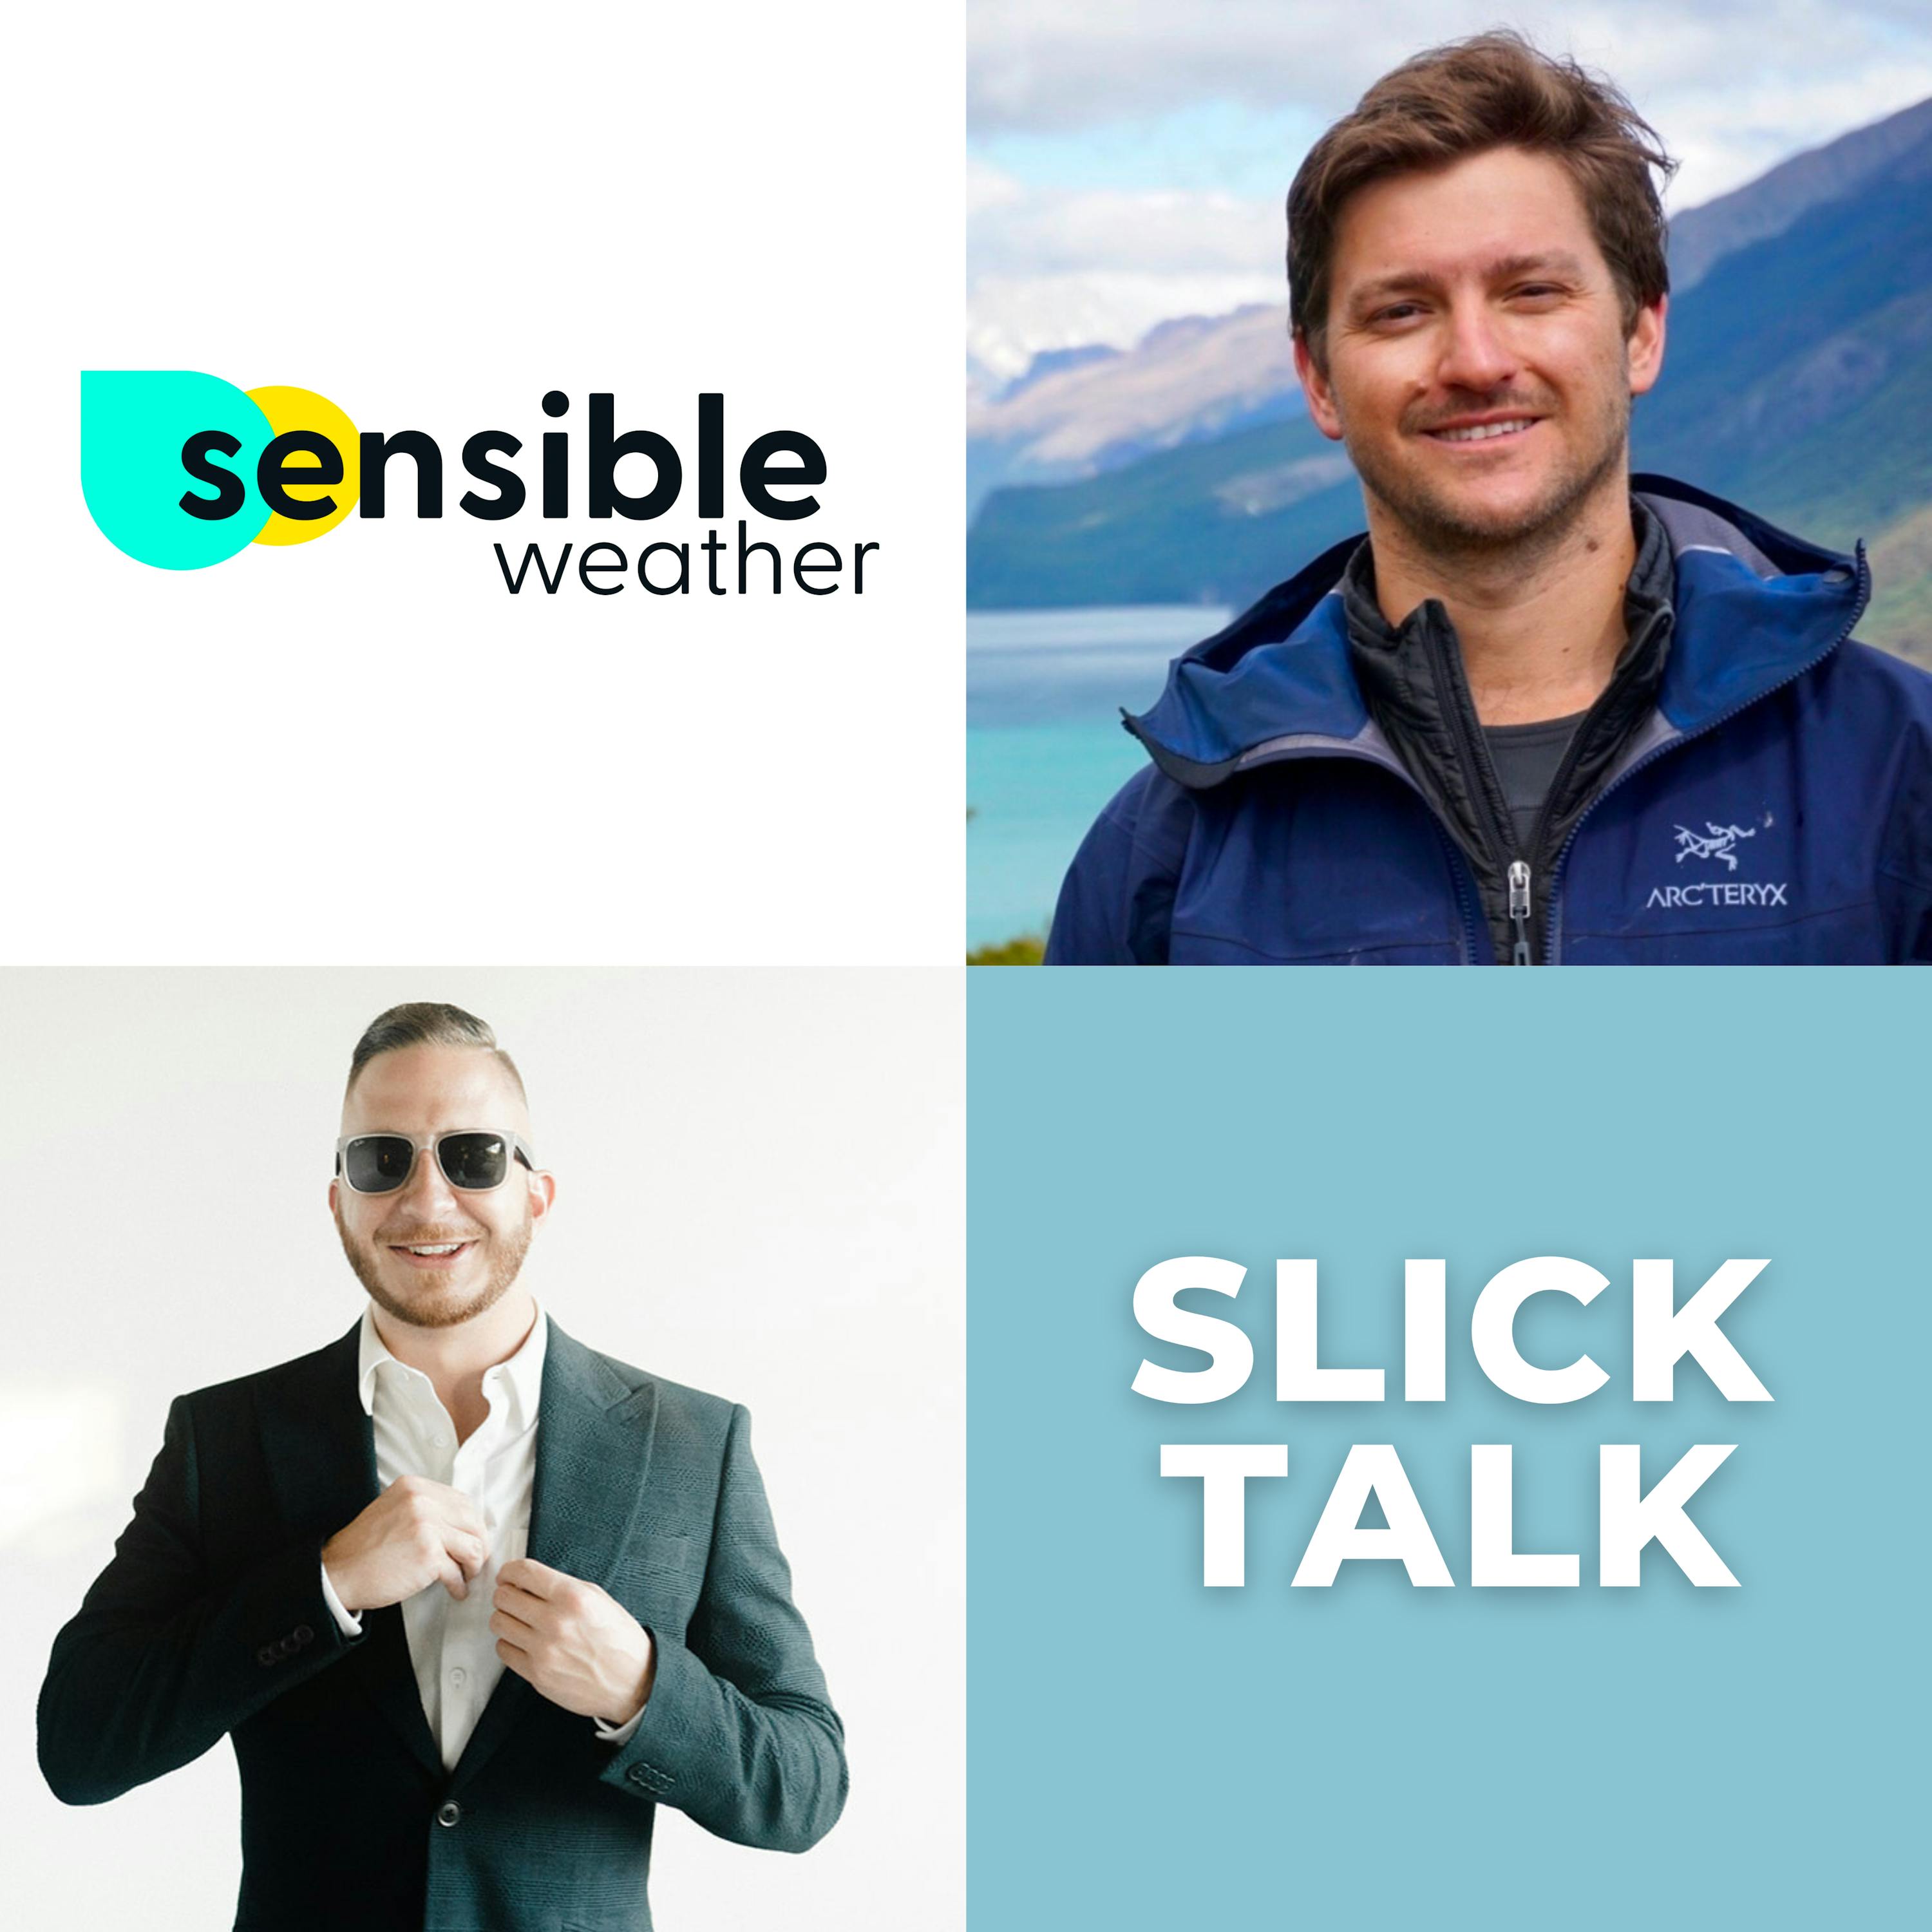 Weather and FinTech: Sensible Weather's Innovative Guarantee in Hospitality